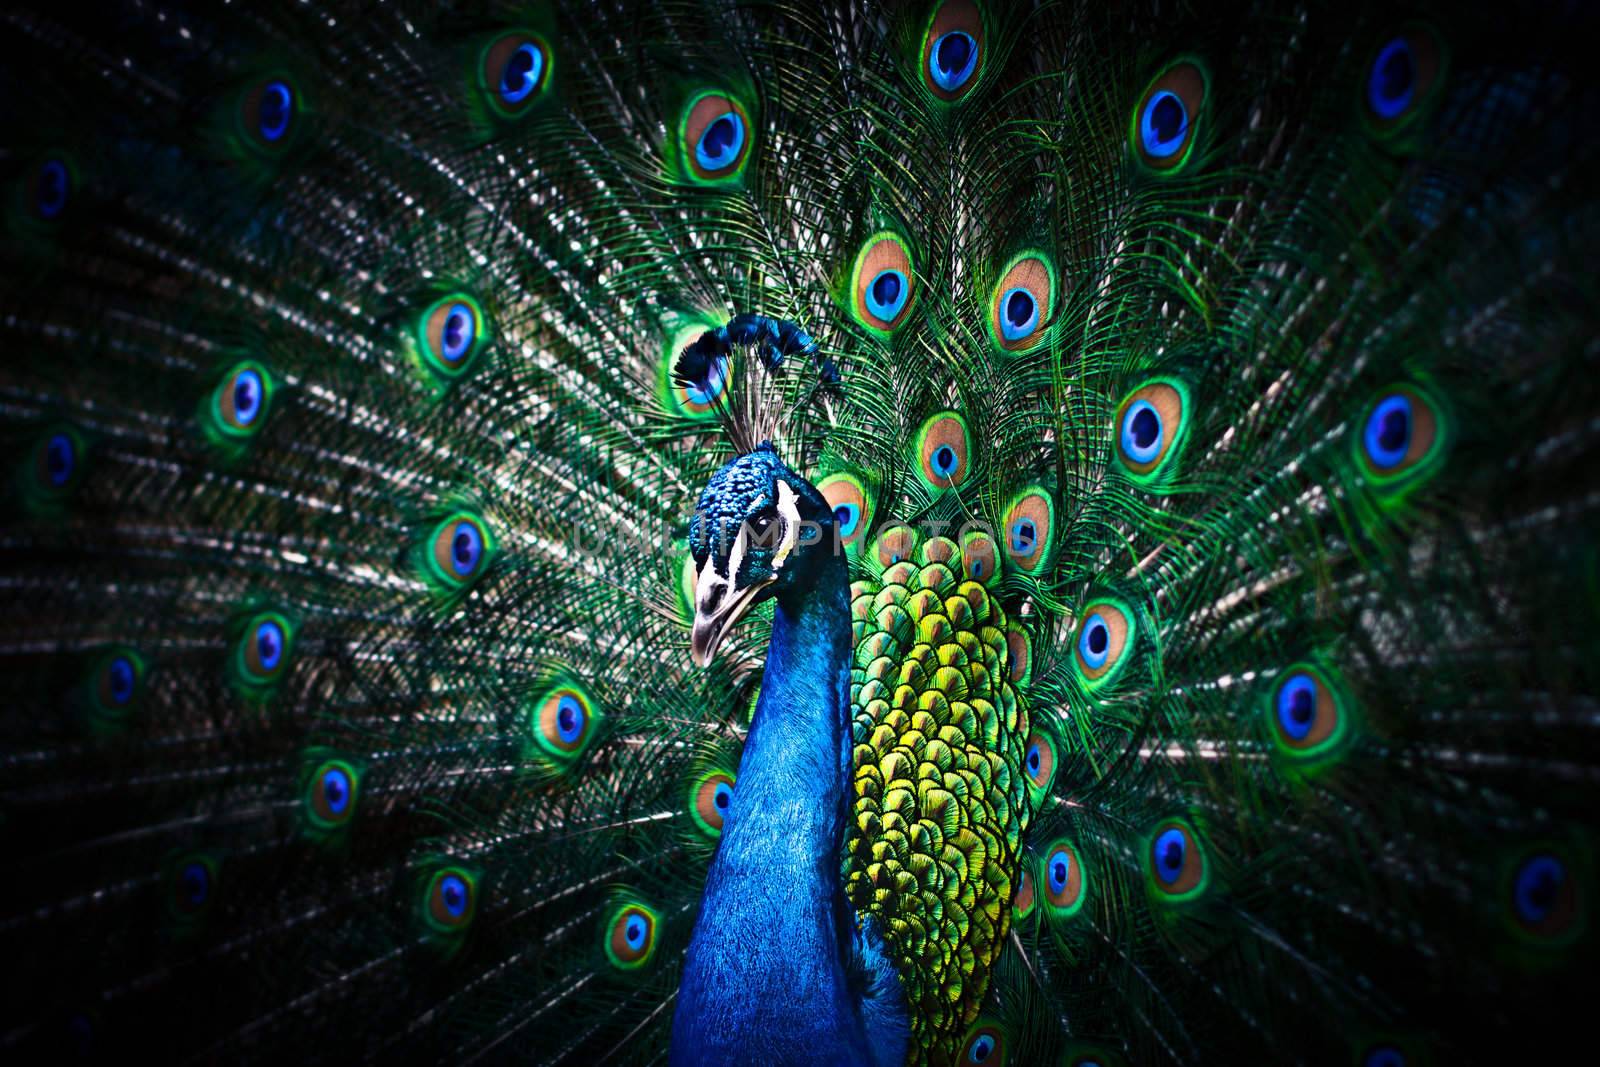 Peacock with Feathers Out by palinchak